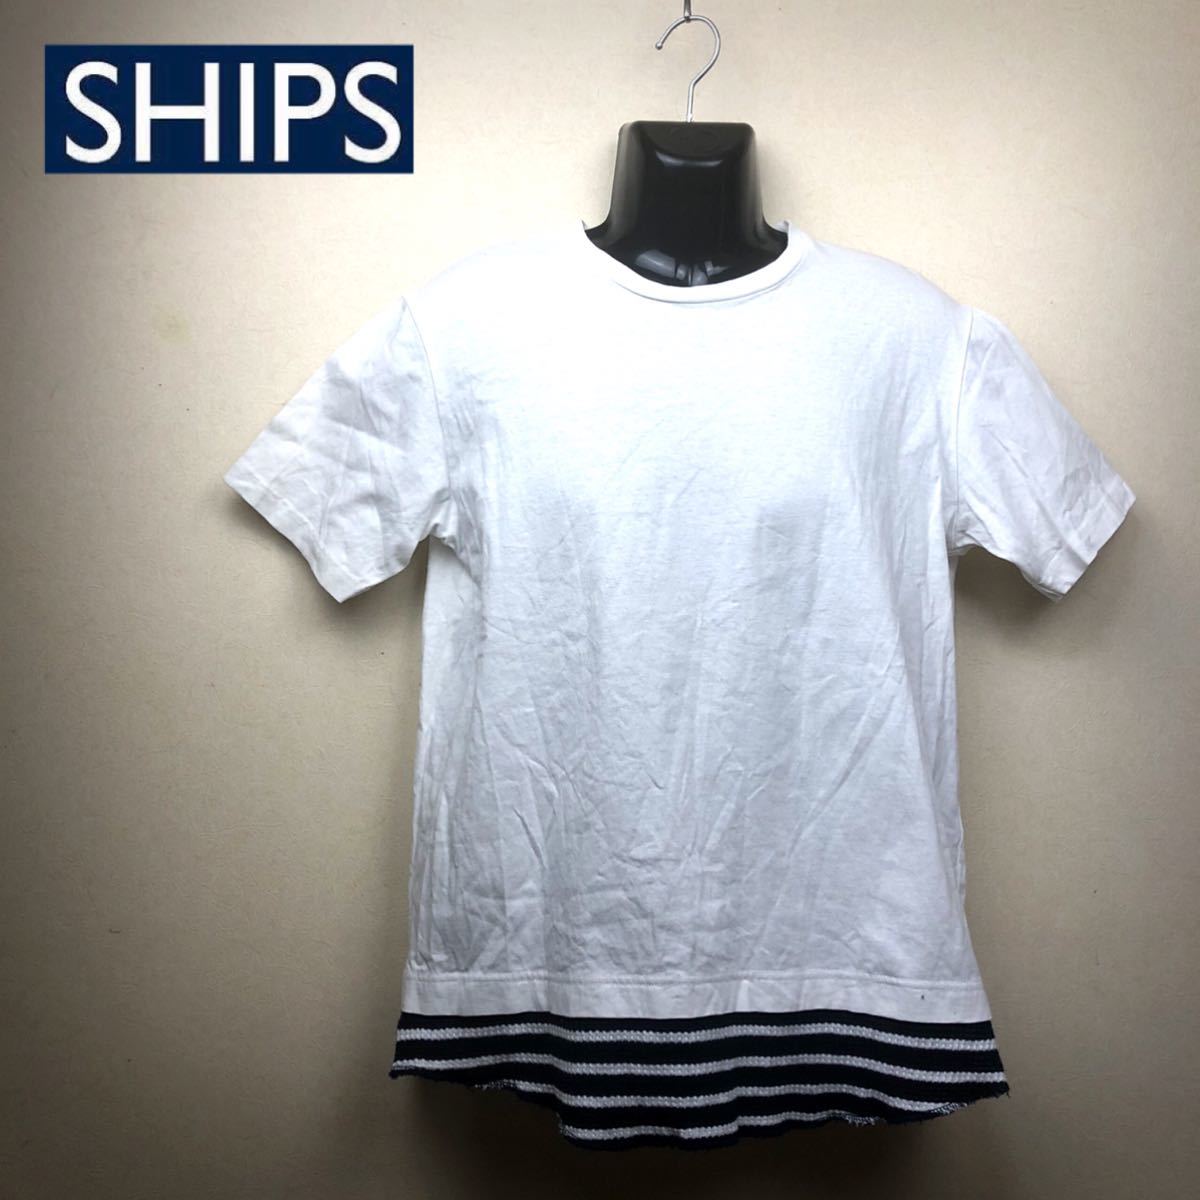  prompt decision *SHIPS*JET BLUE* Ships * men's * T-shirt * ound-necked * short sleeves * white * border * made in Japan *S* cotton 100%* marine look *